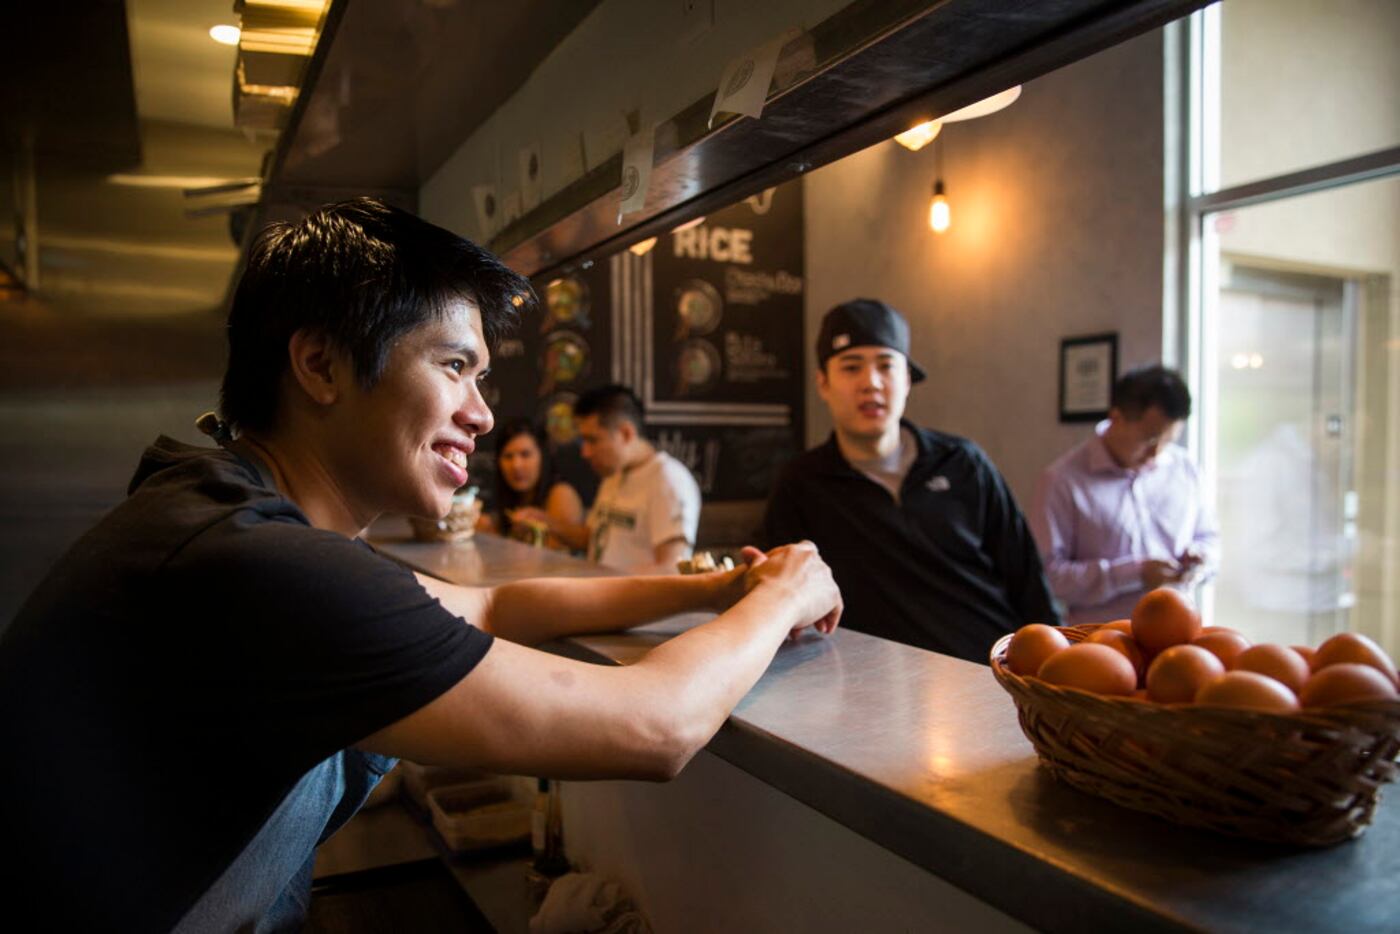 Executive Chef Matthew Hoa chats with customers at Ten.